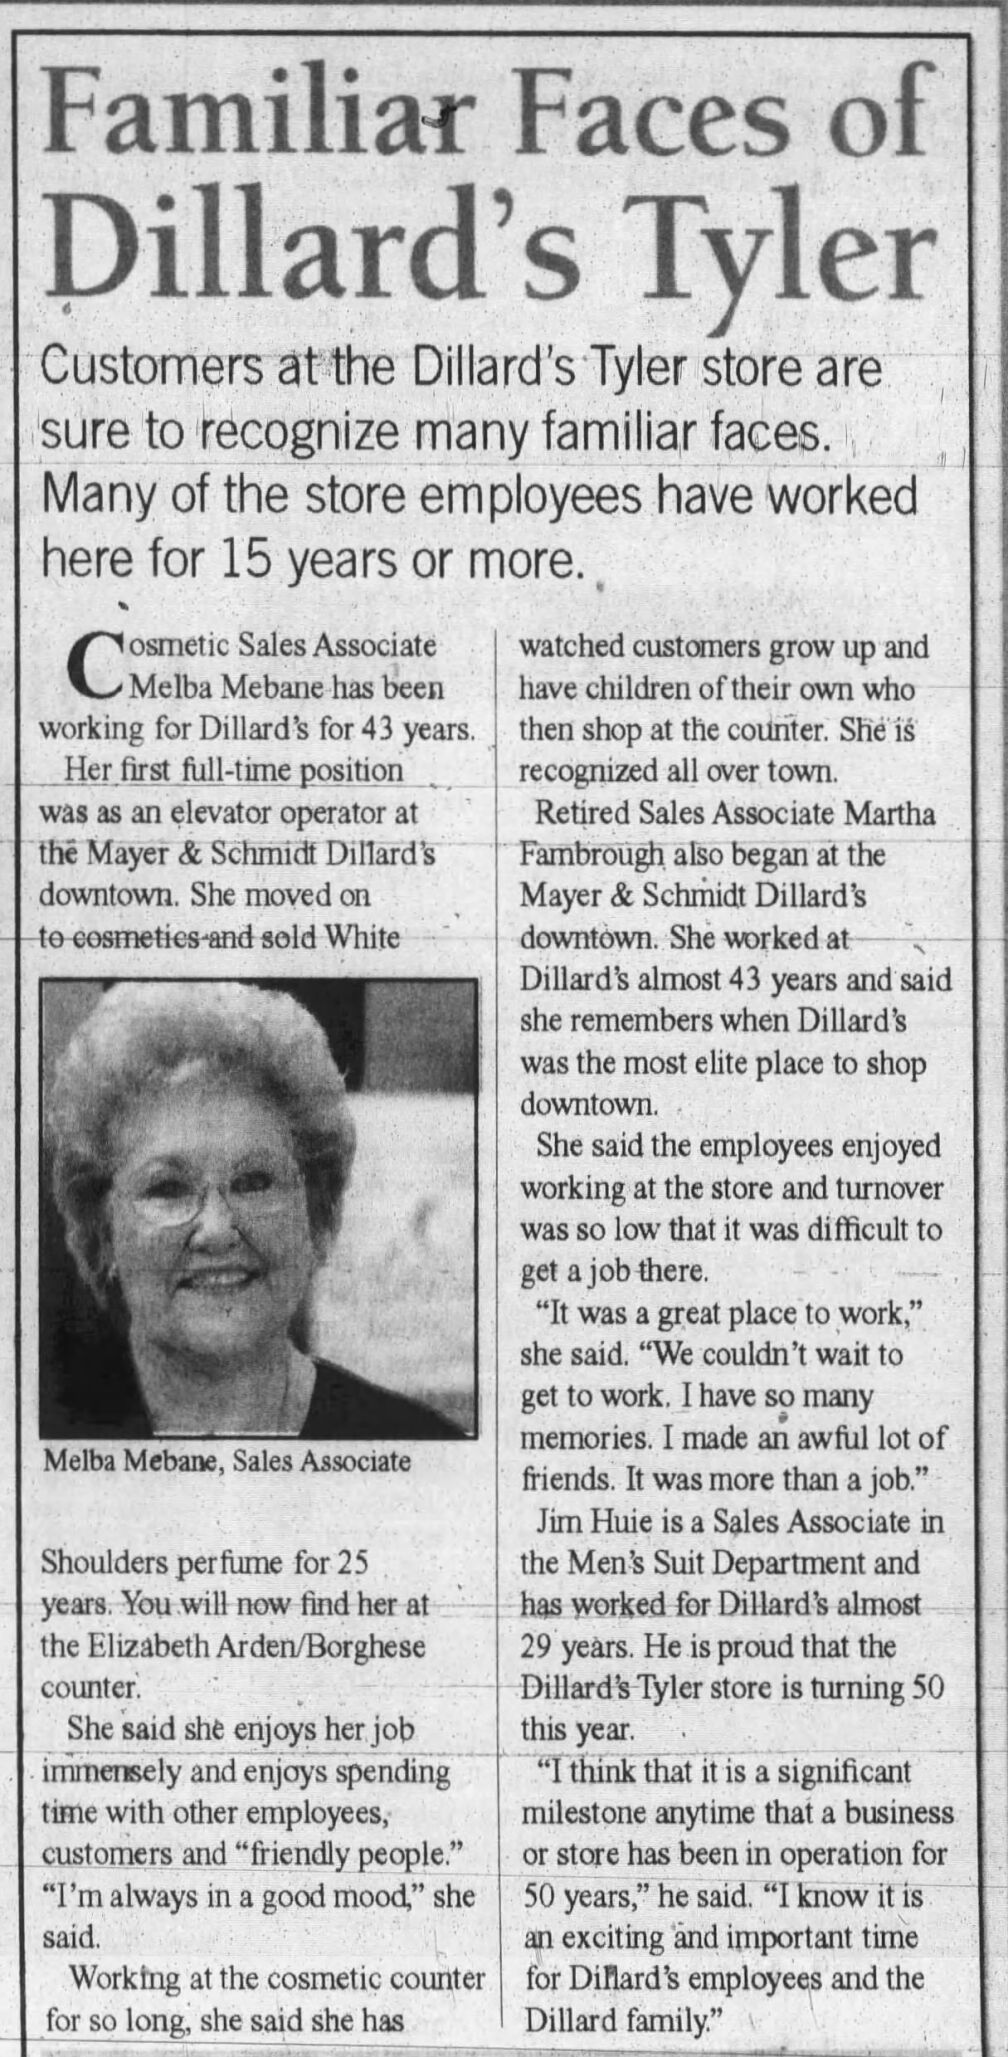 90-year-old woman retired from Dillard's after working there 74 years